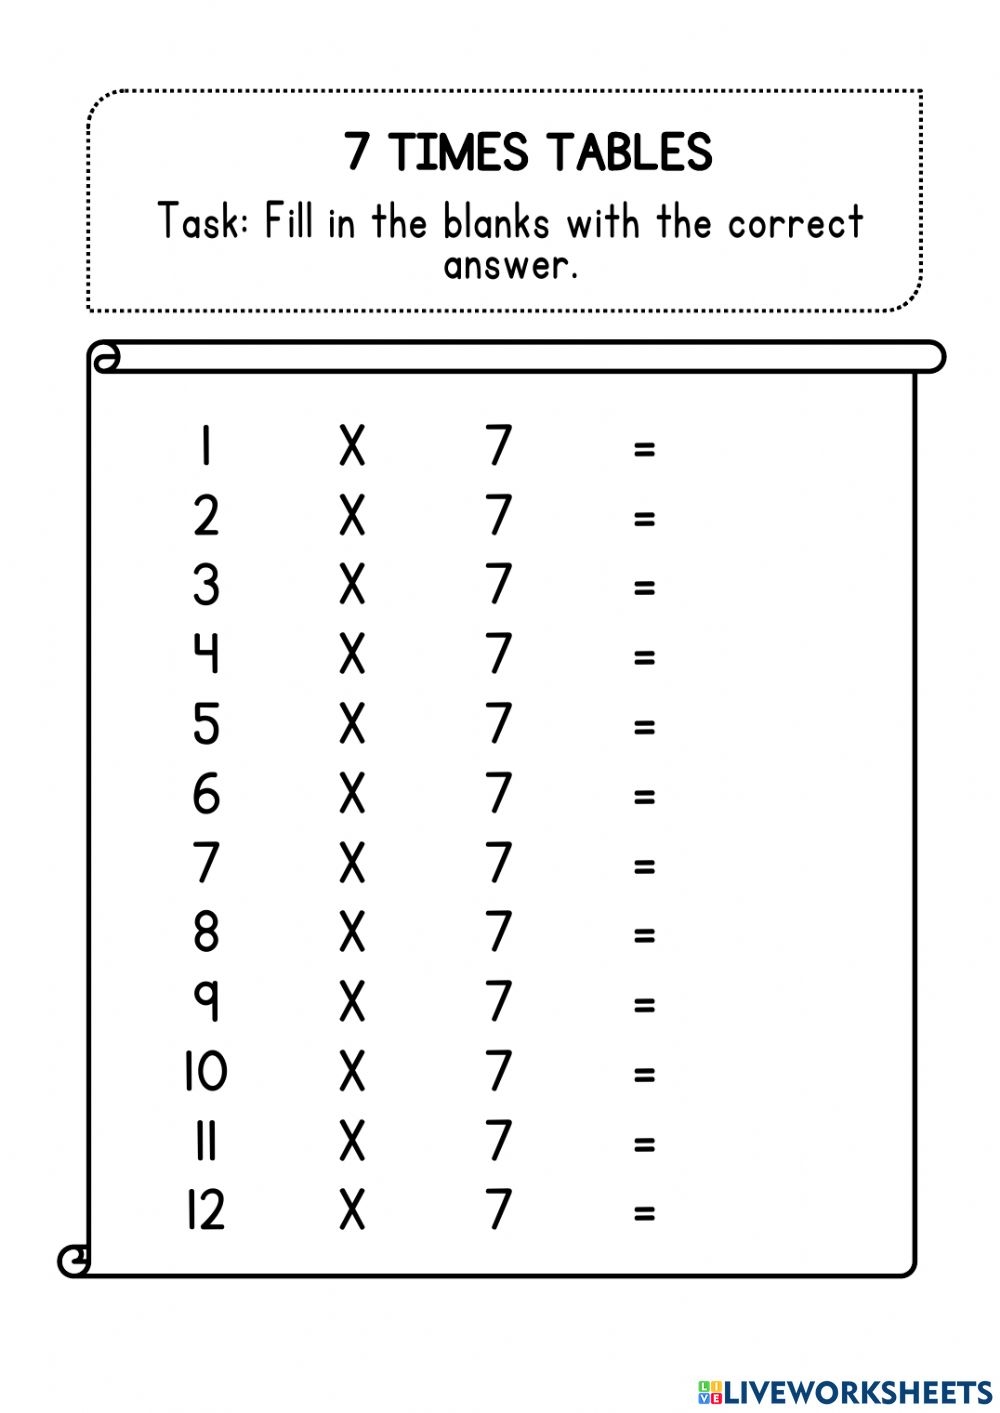 7 Times Tables Interactive Worksheet